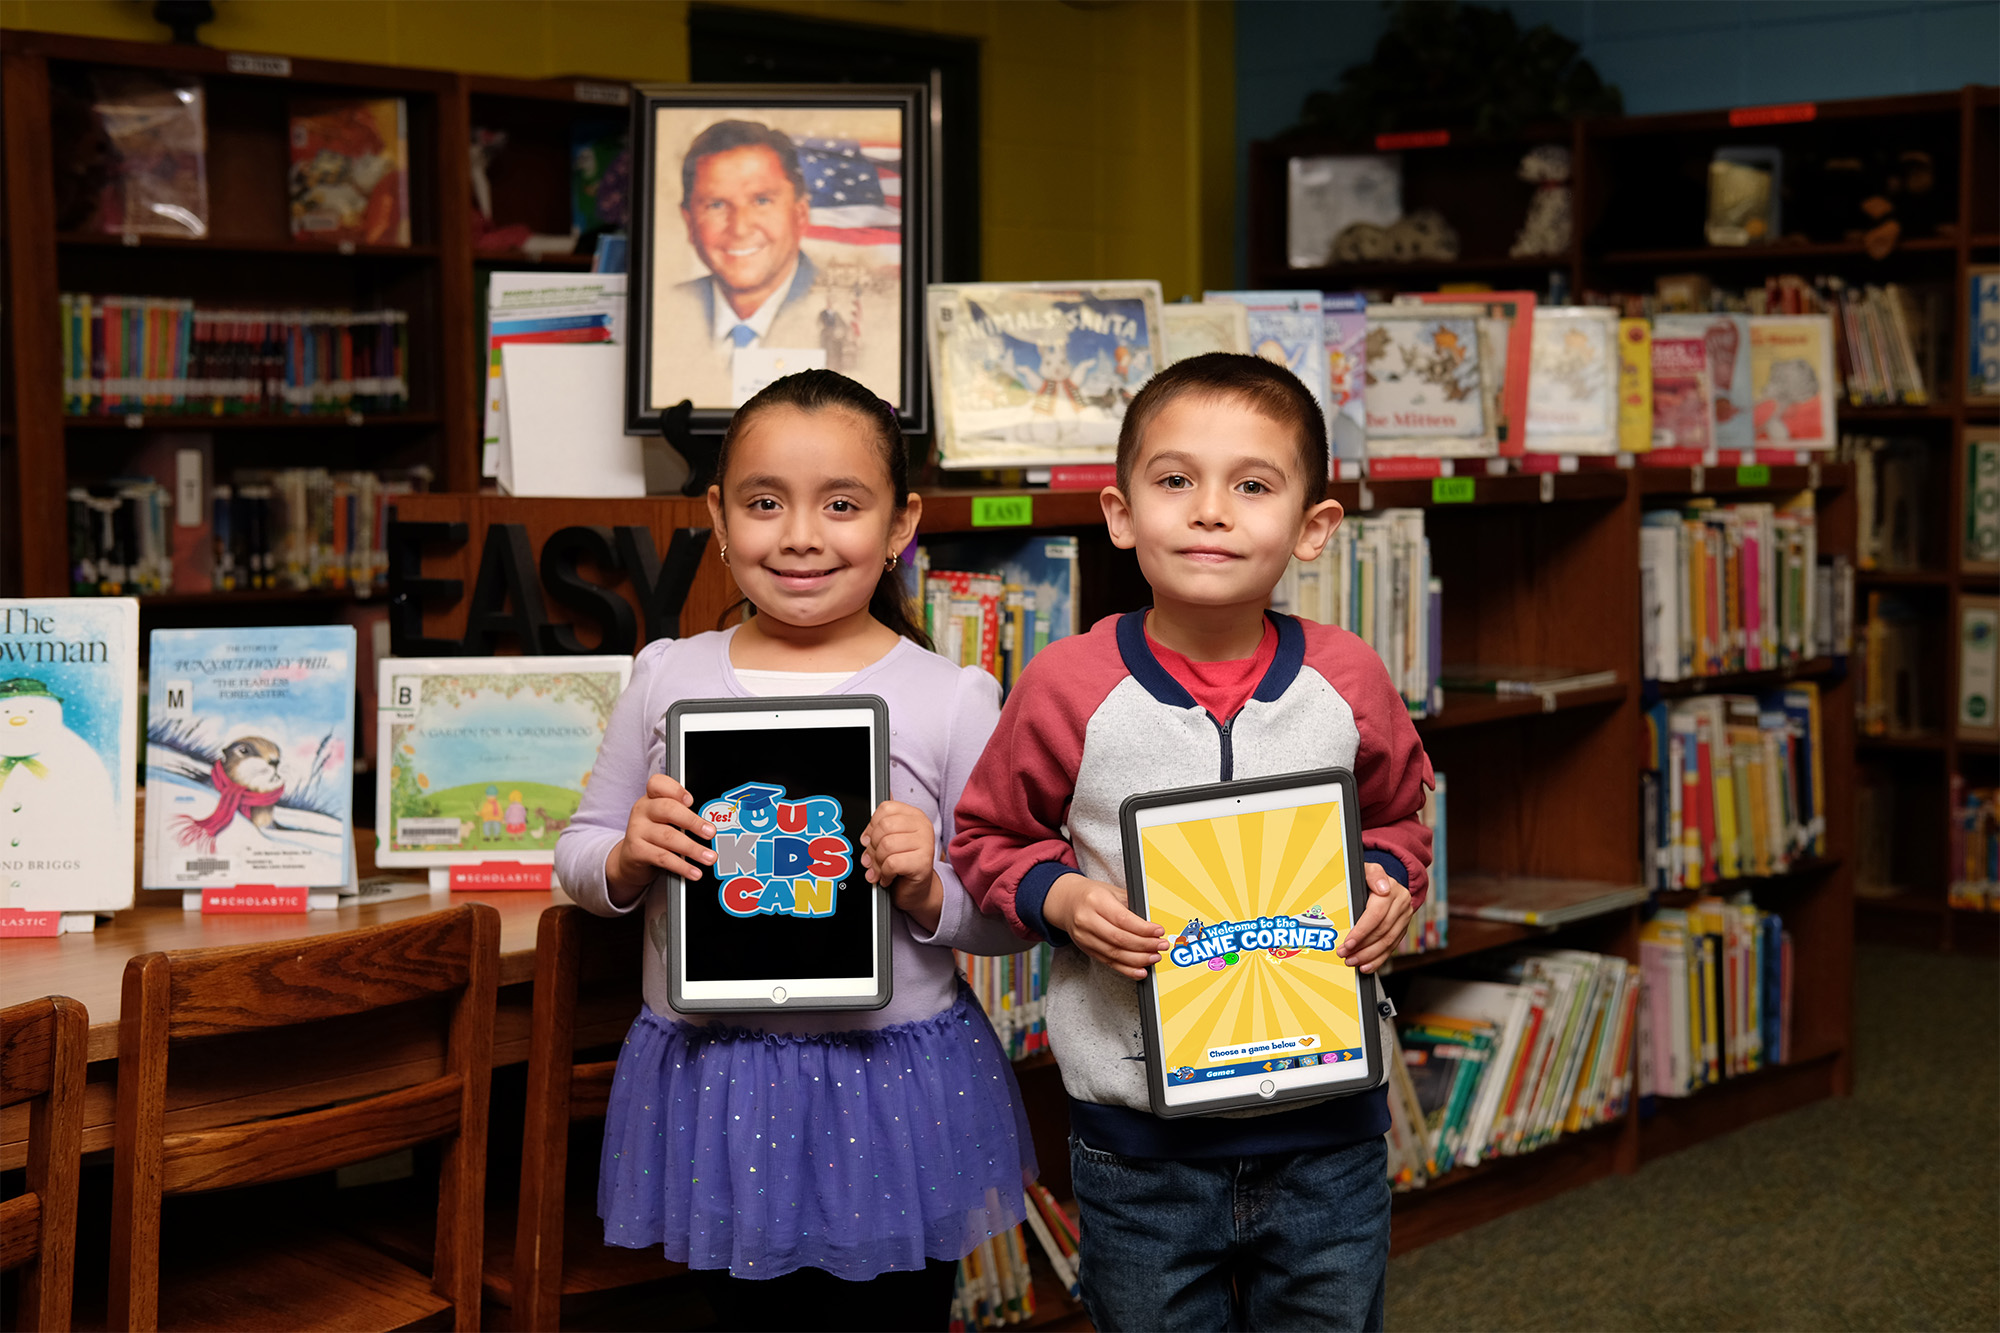 Yes! Our Kids Can program expands districtwide